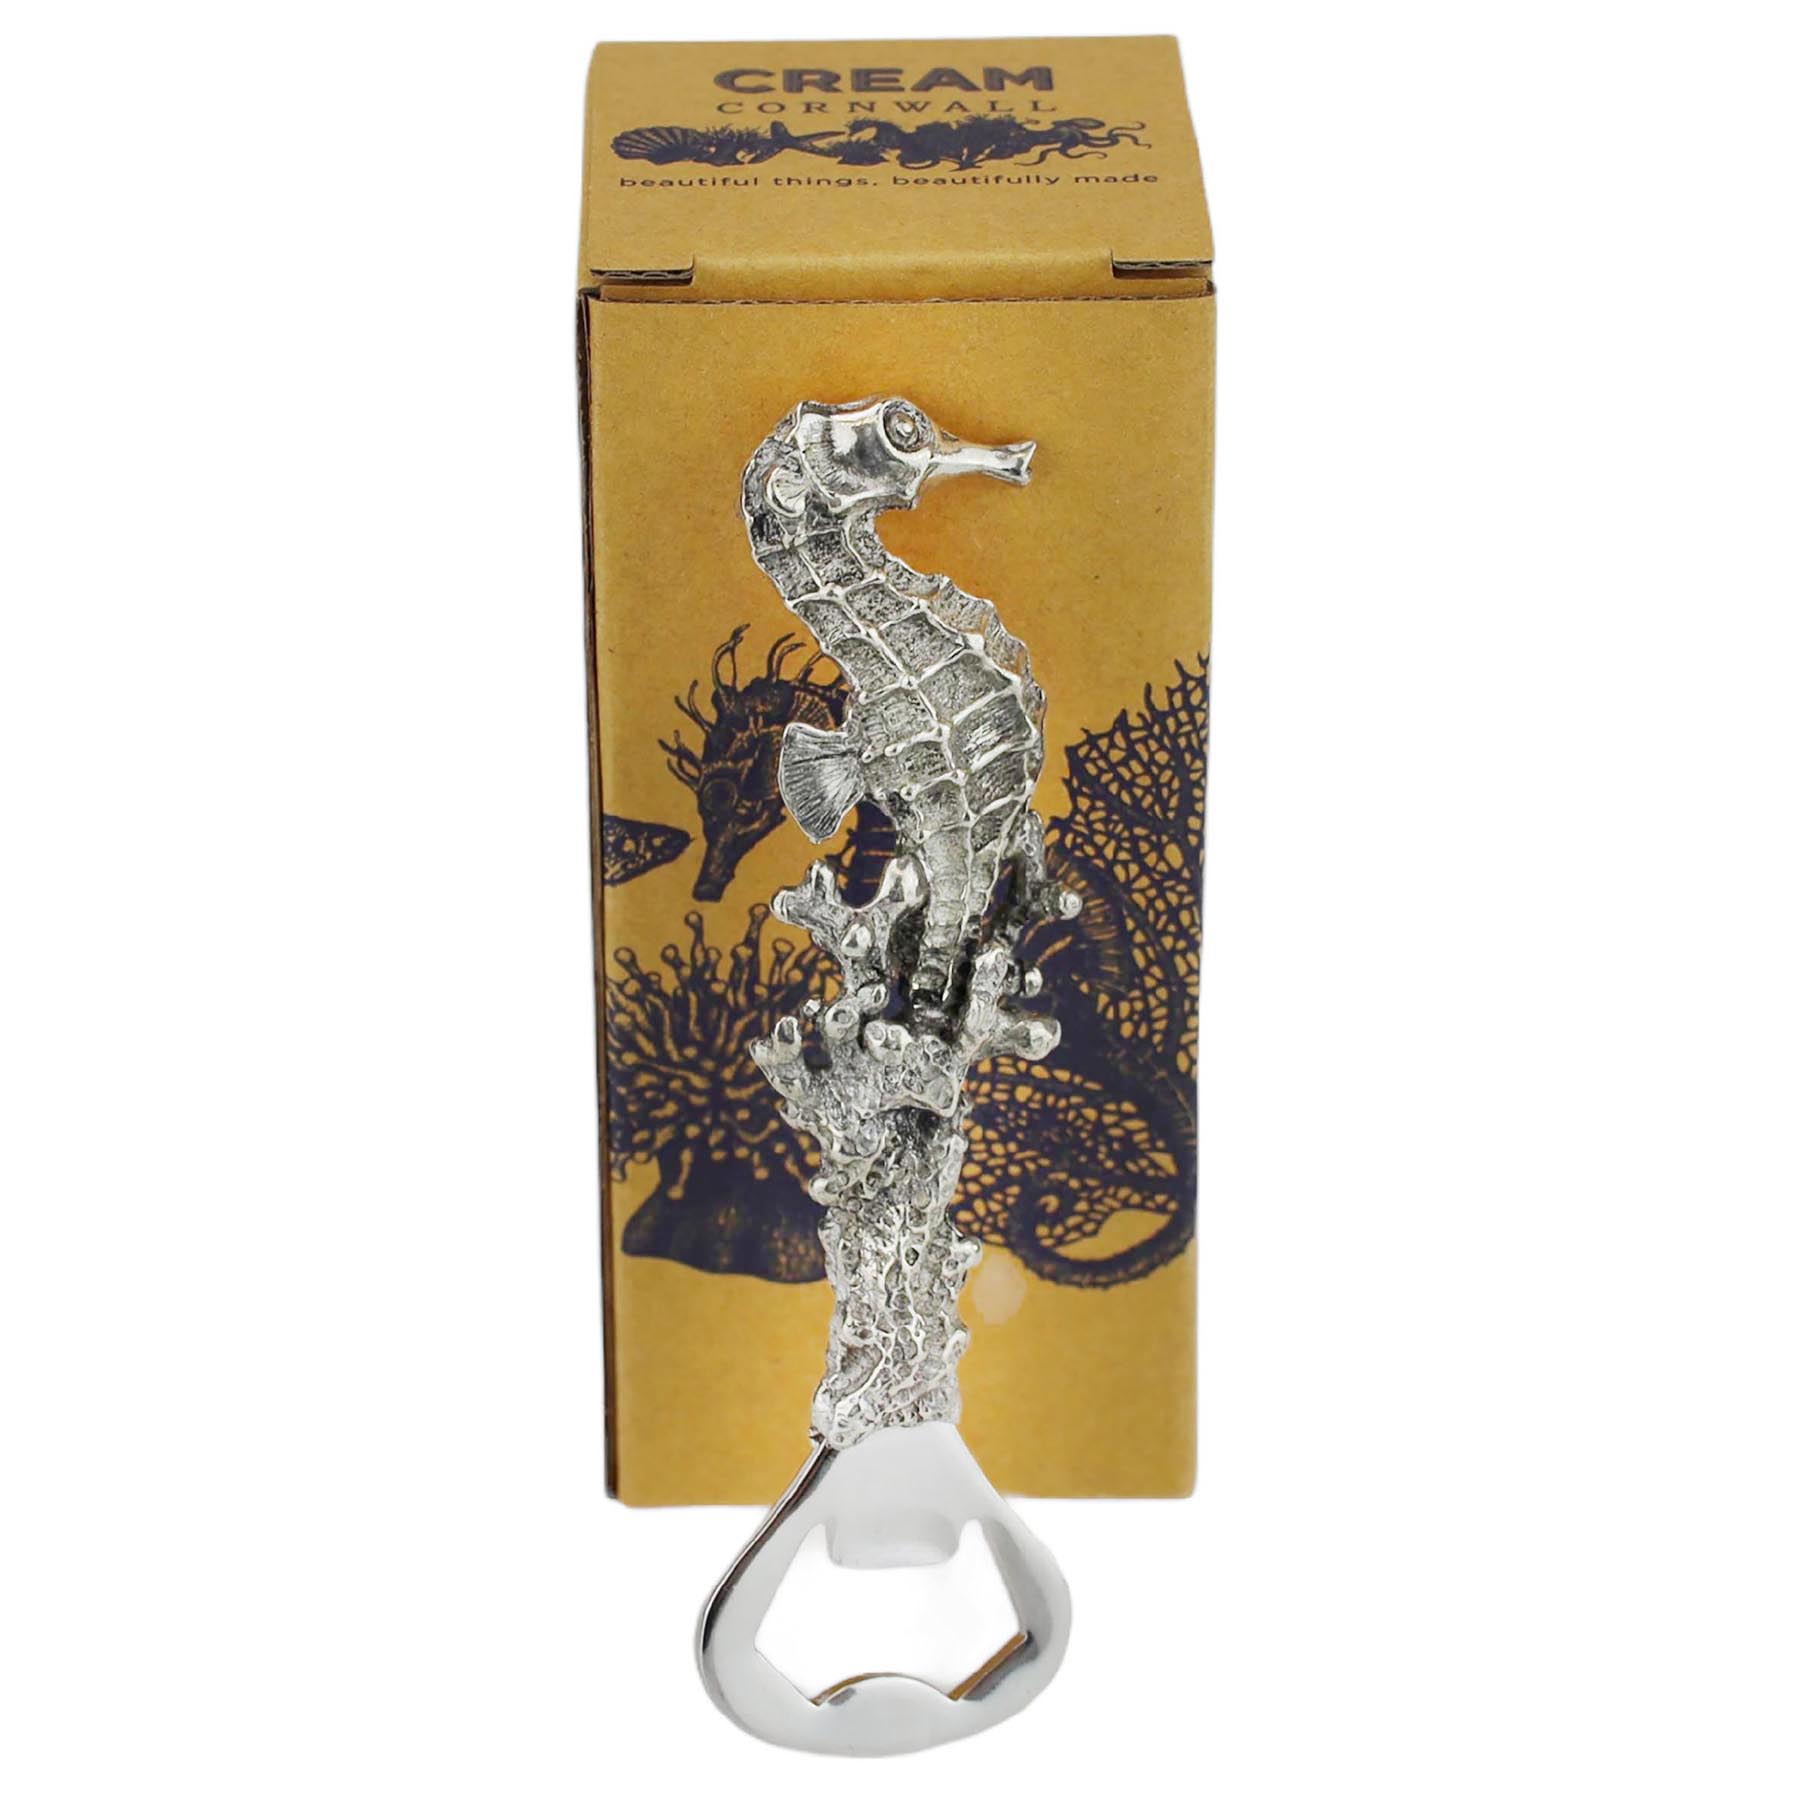 Pewter Seahorse Bottle Opener on its side in front of a cream cornwall box